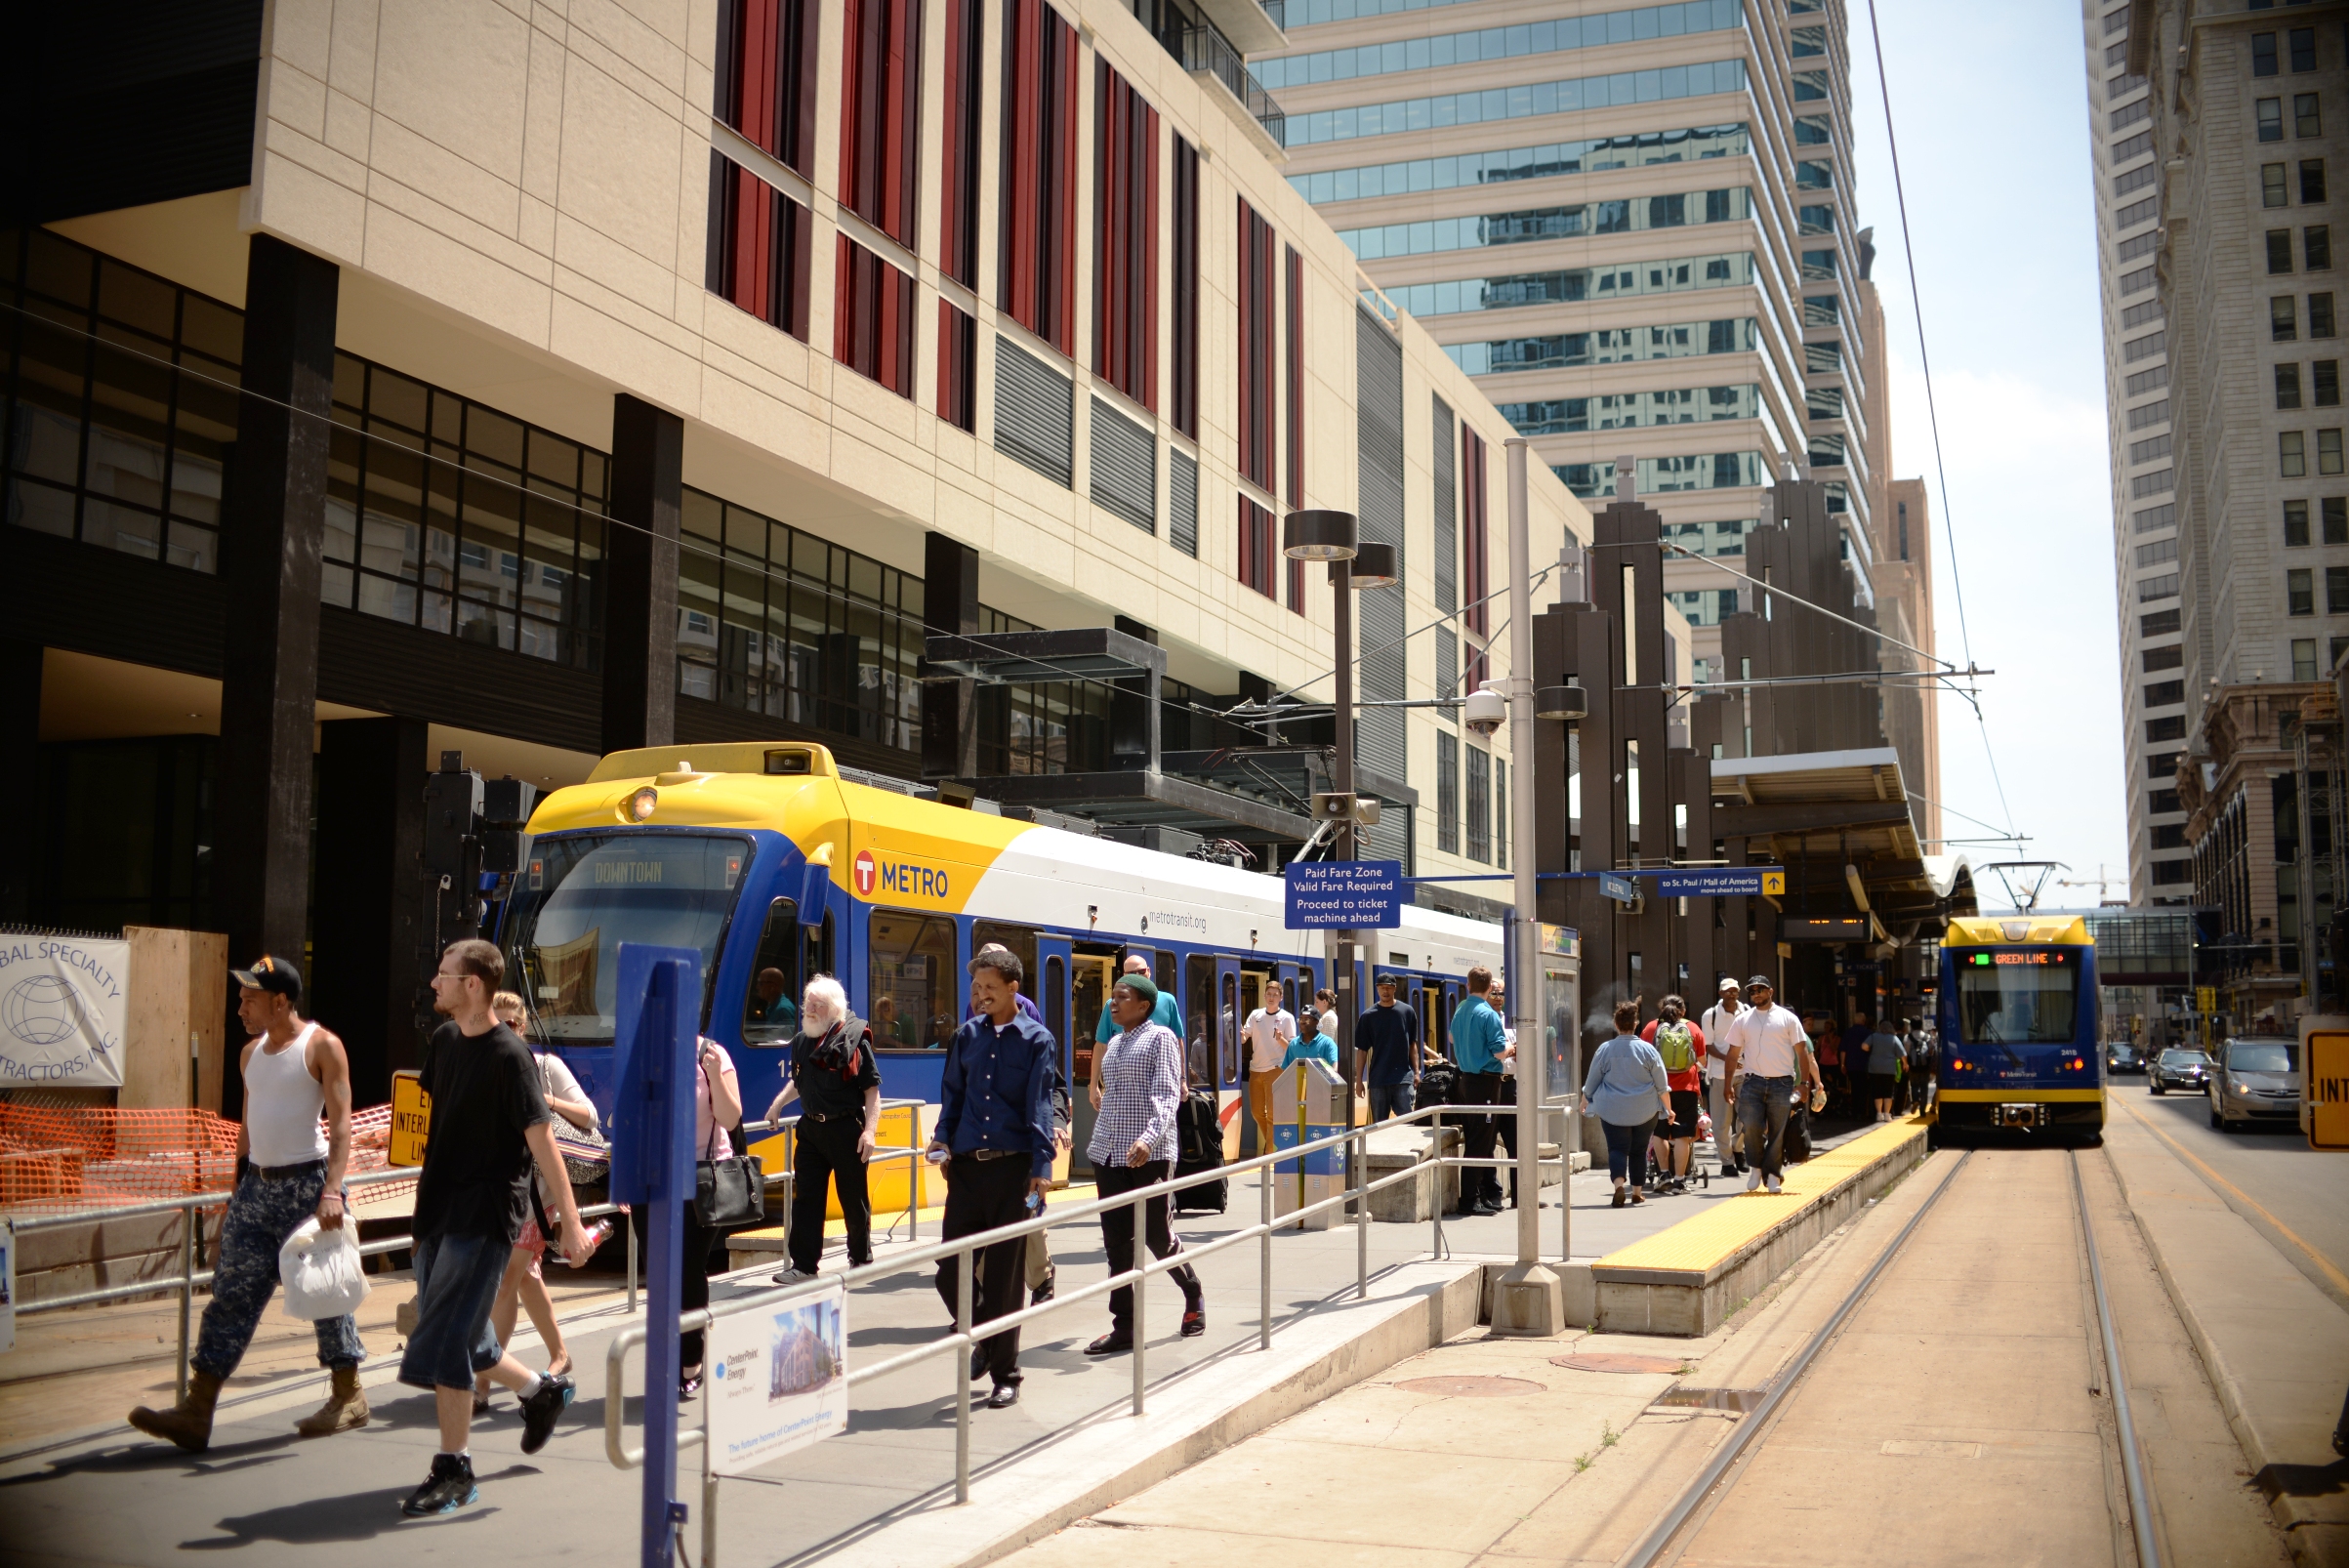 Customers exit a light-rail train at Nicollet Mall Station in downtown Minneapolis.